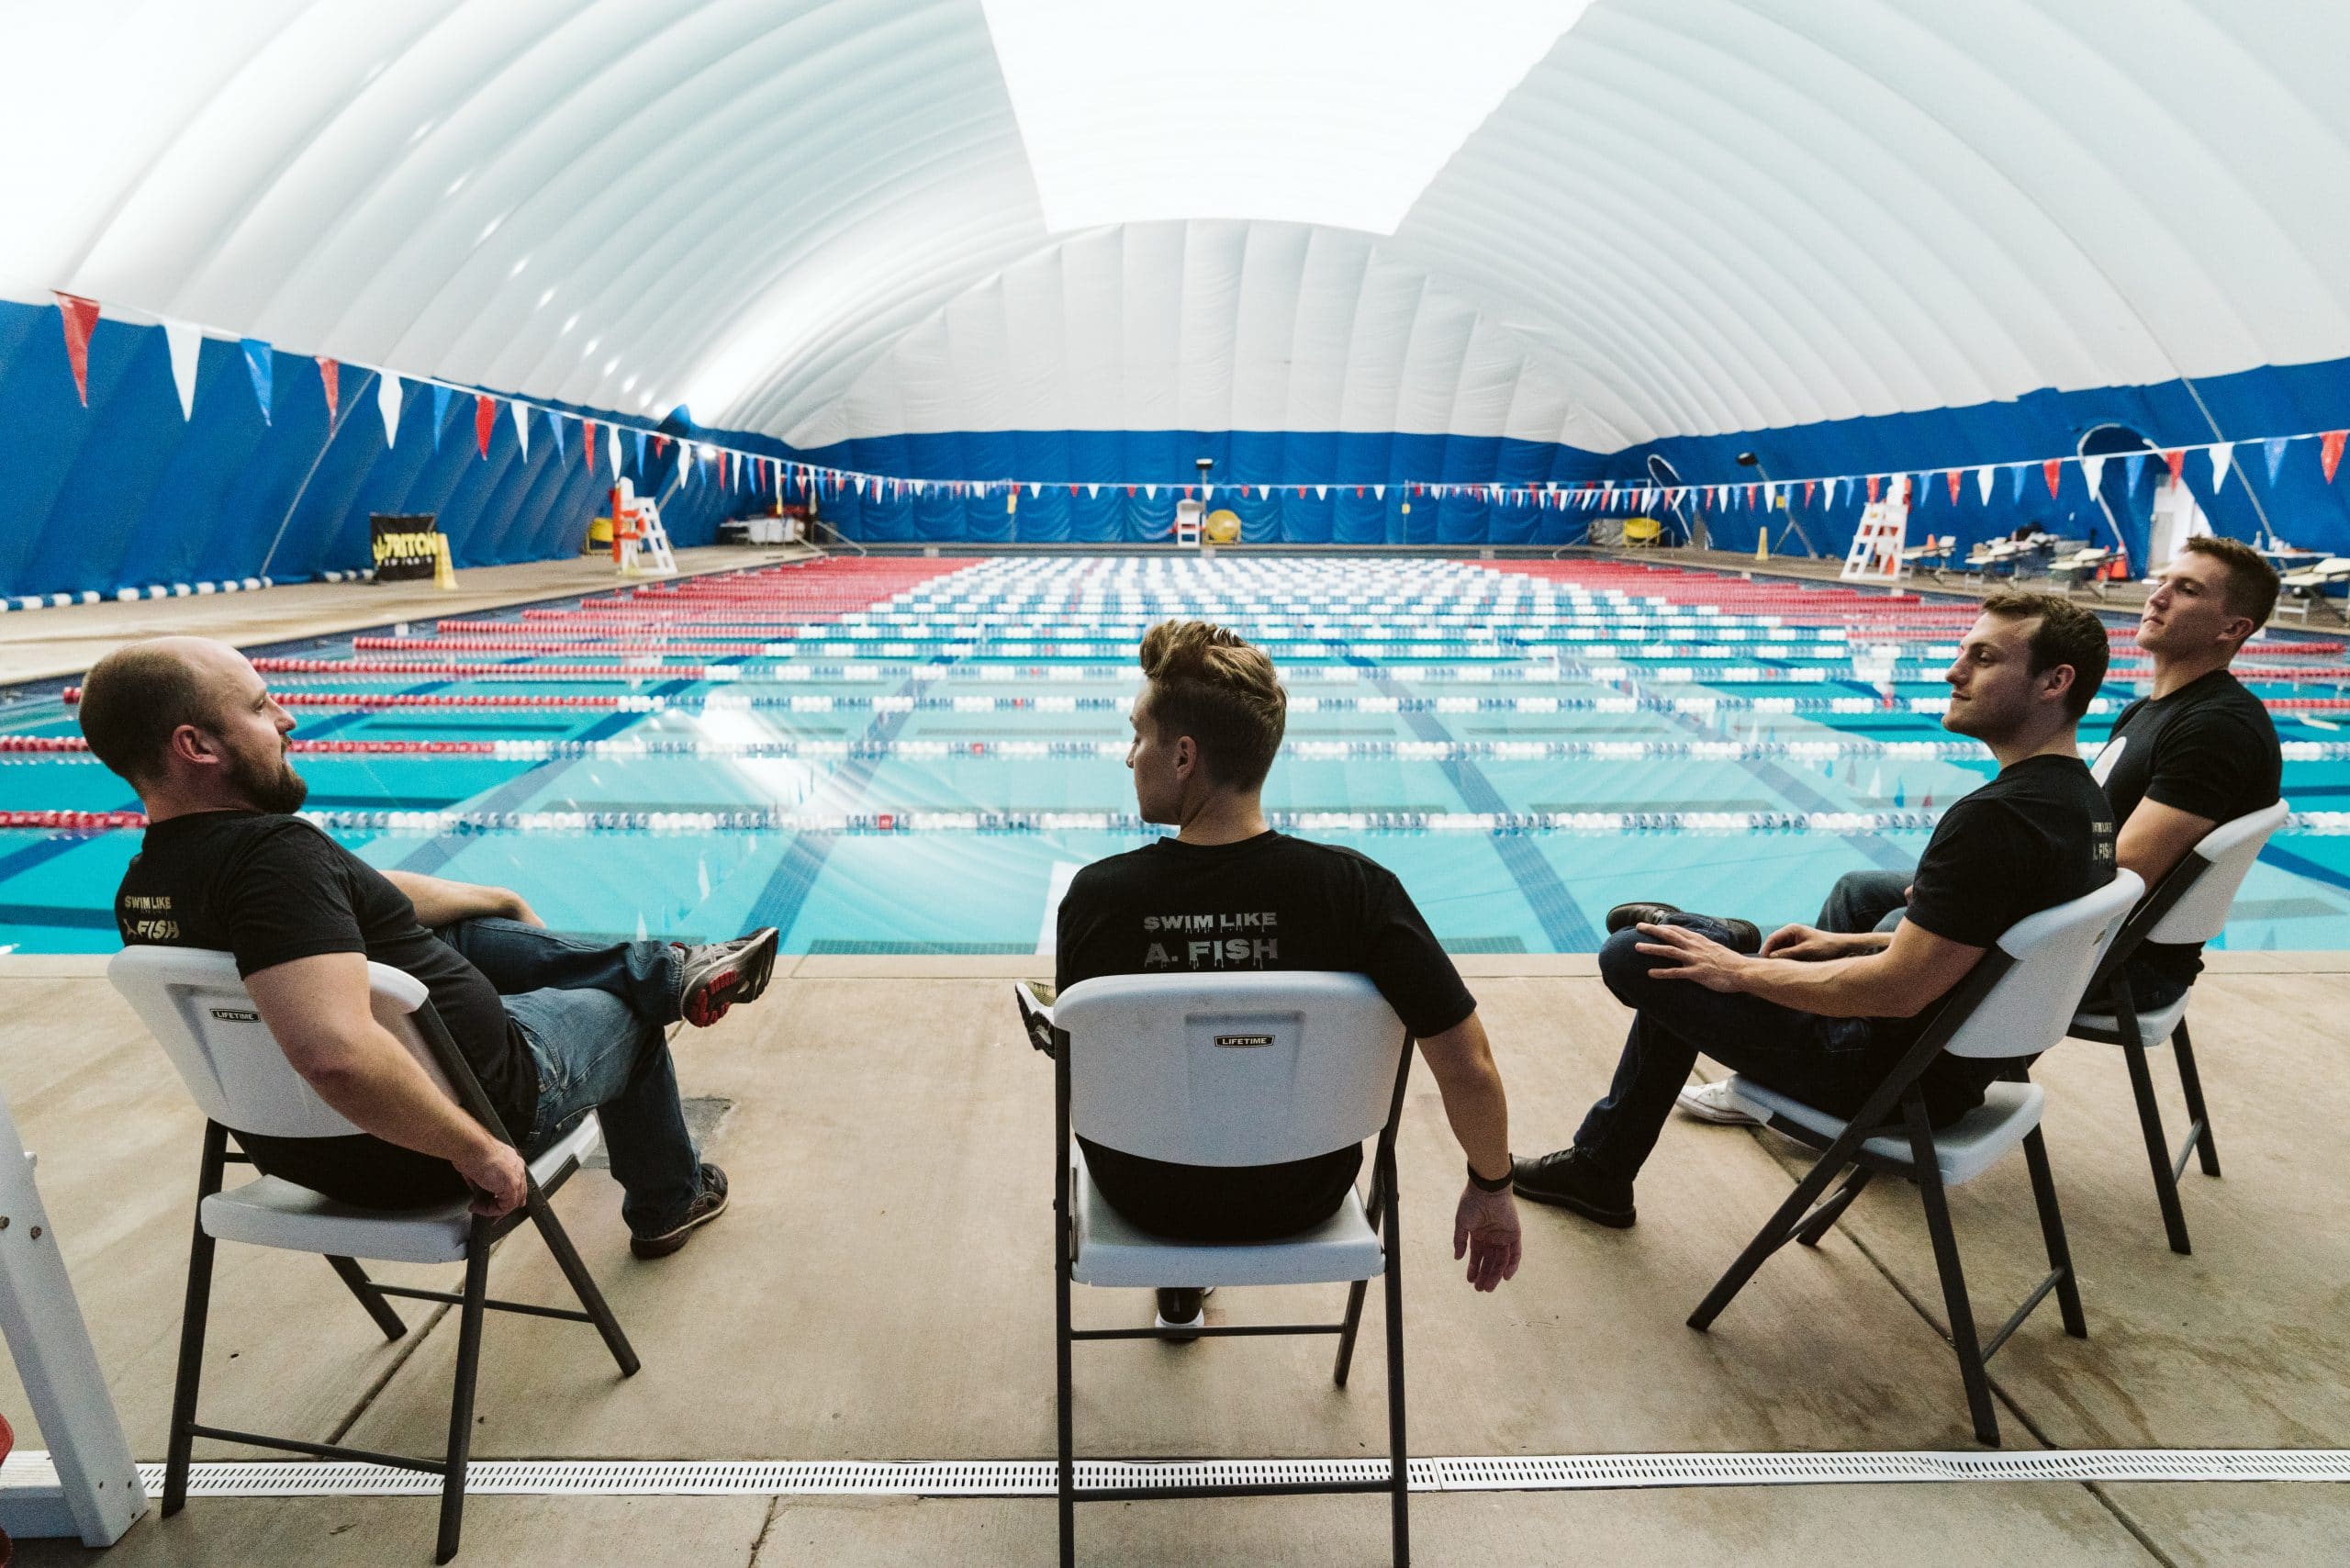 Swim Like A. Fish team sitting by an indoor swimming pool.